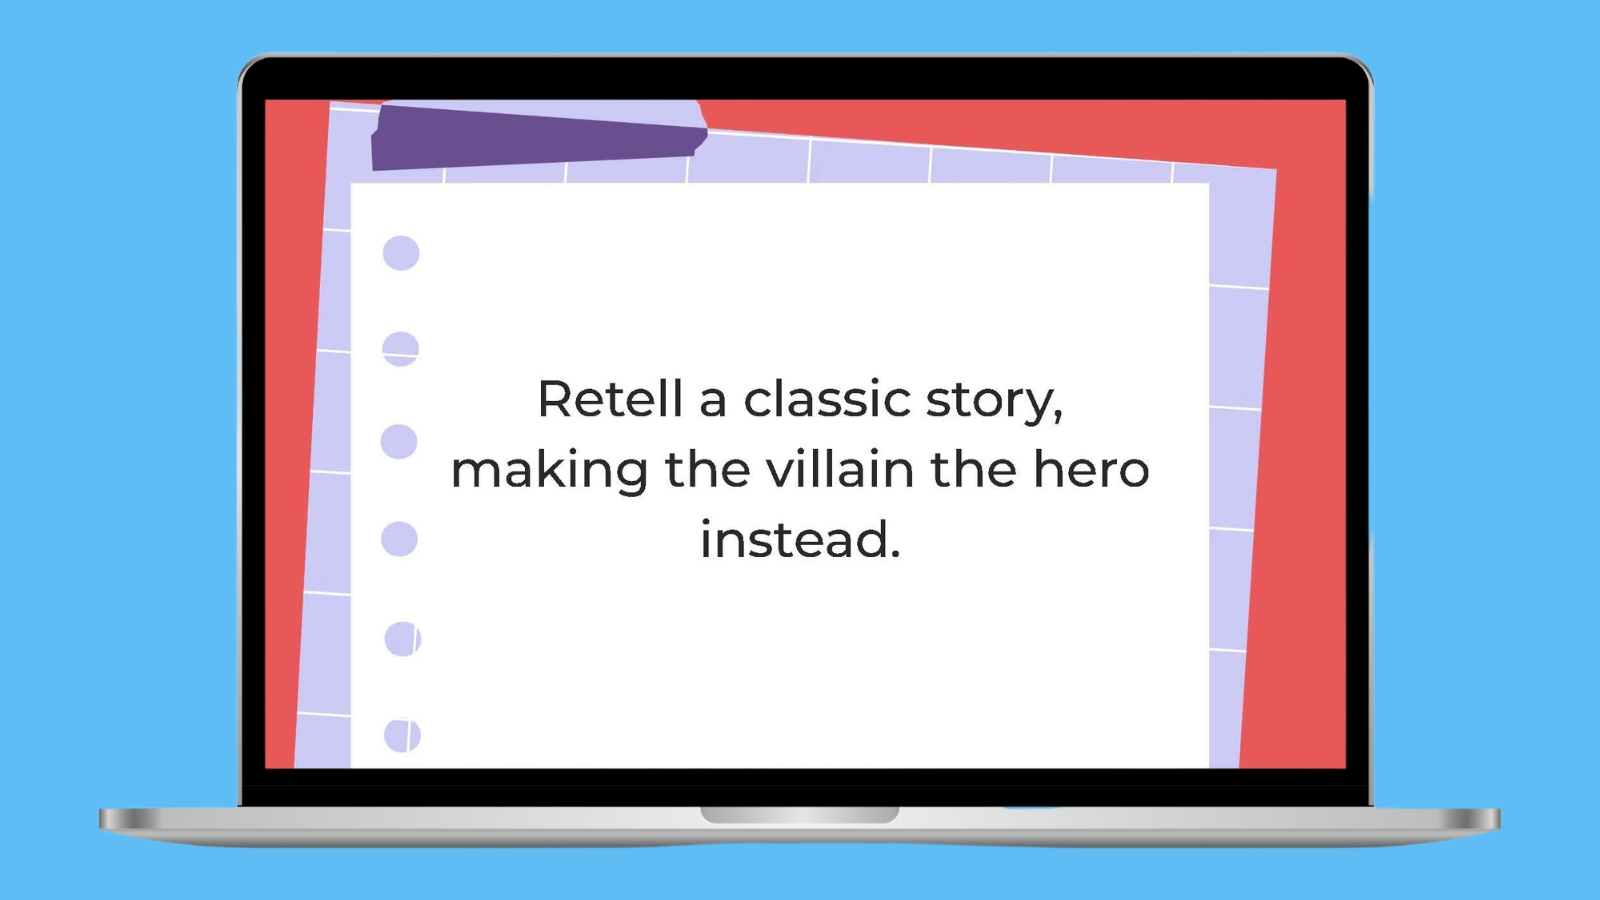 Retell a classic story, making the villain the hero instead.